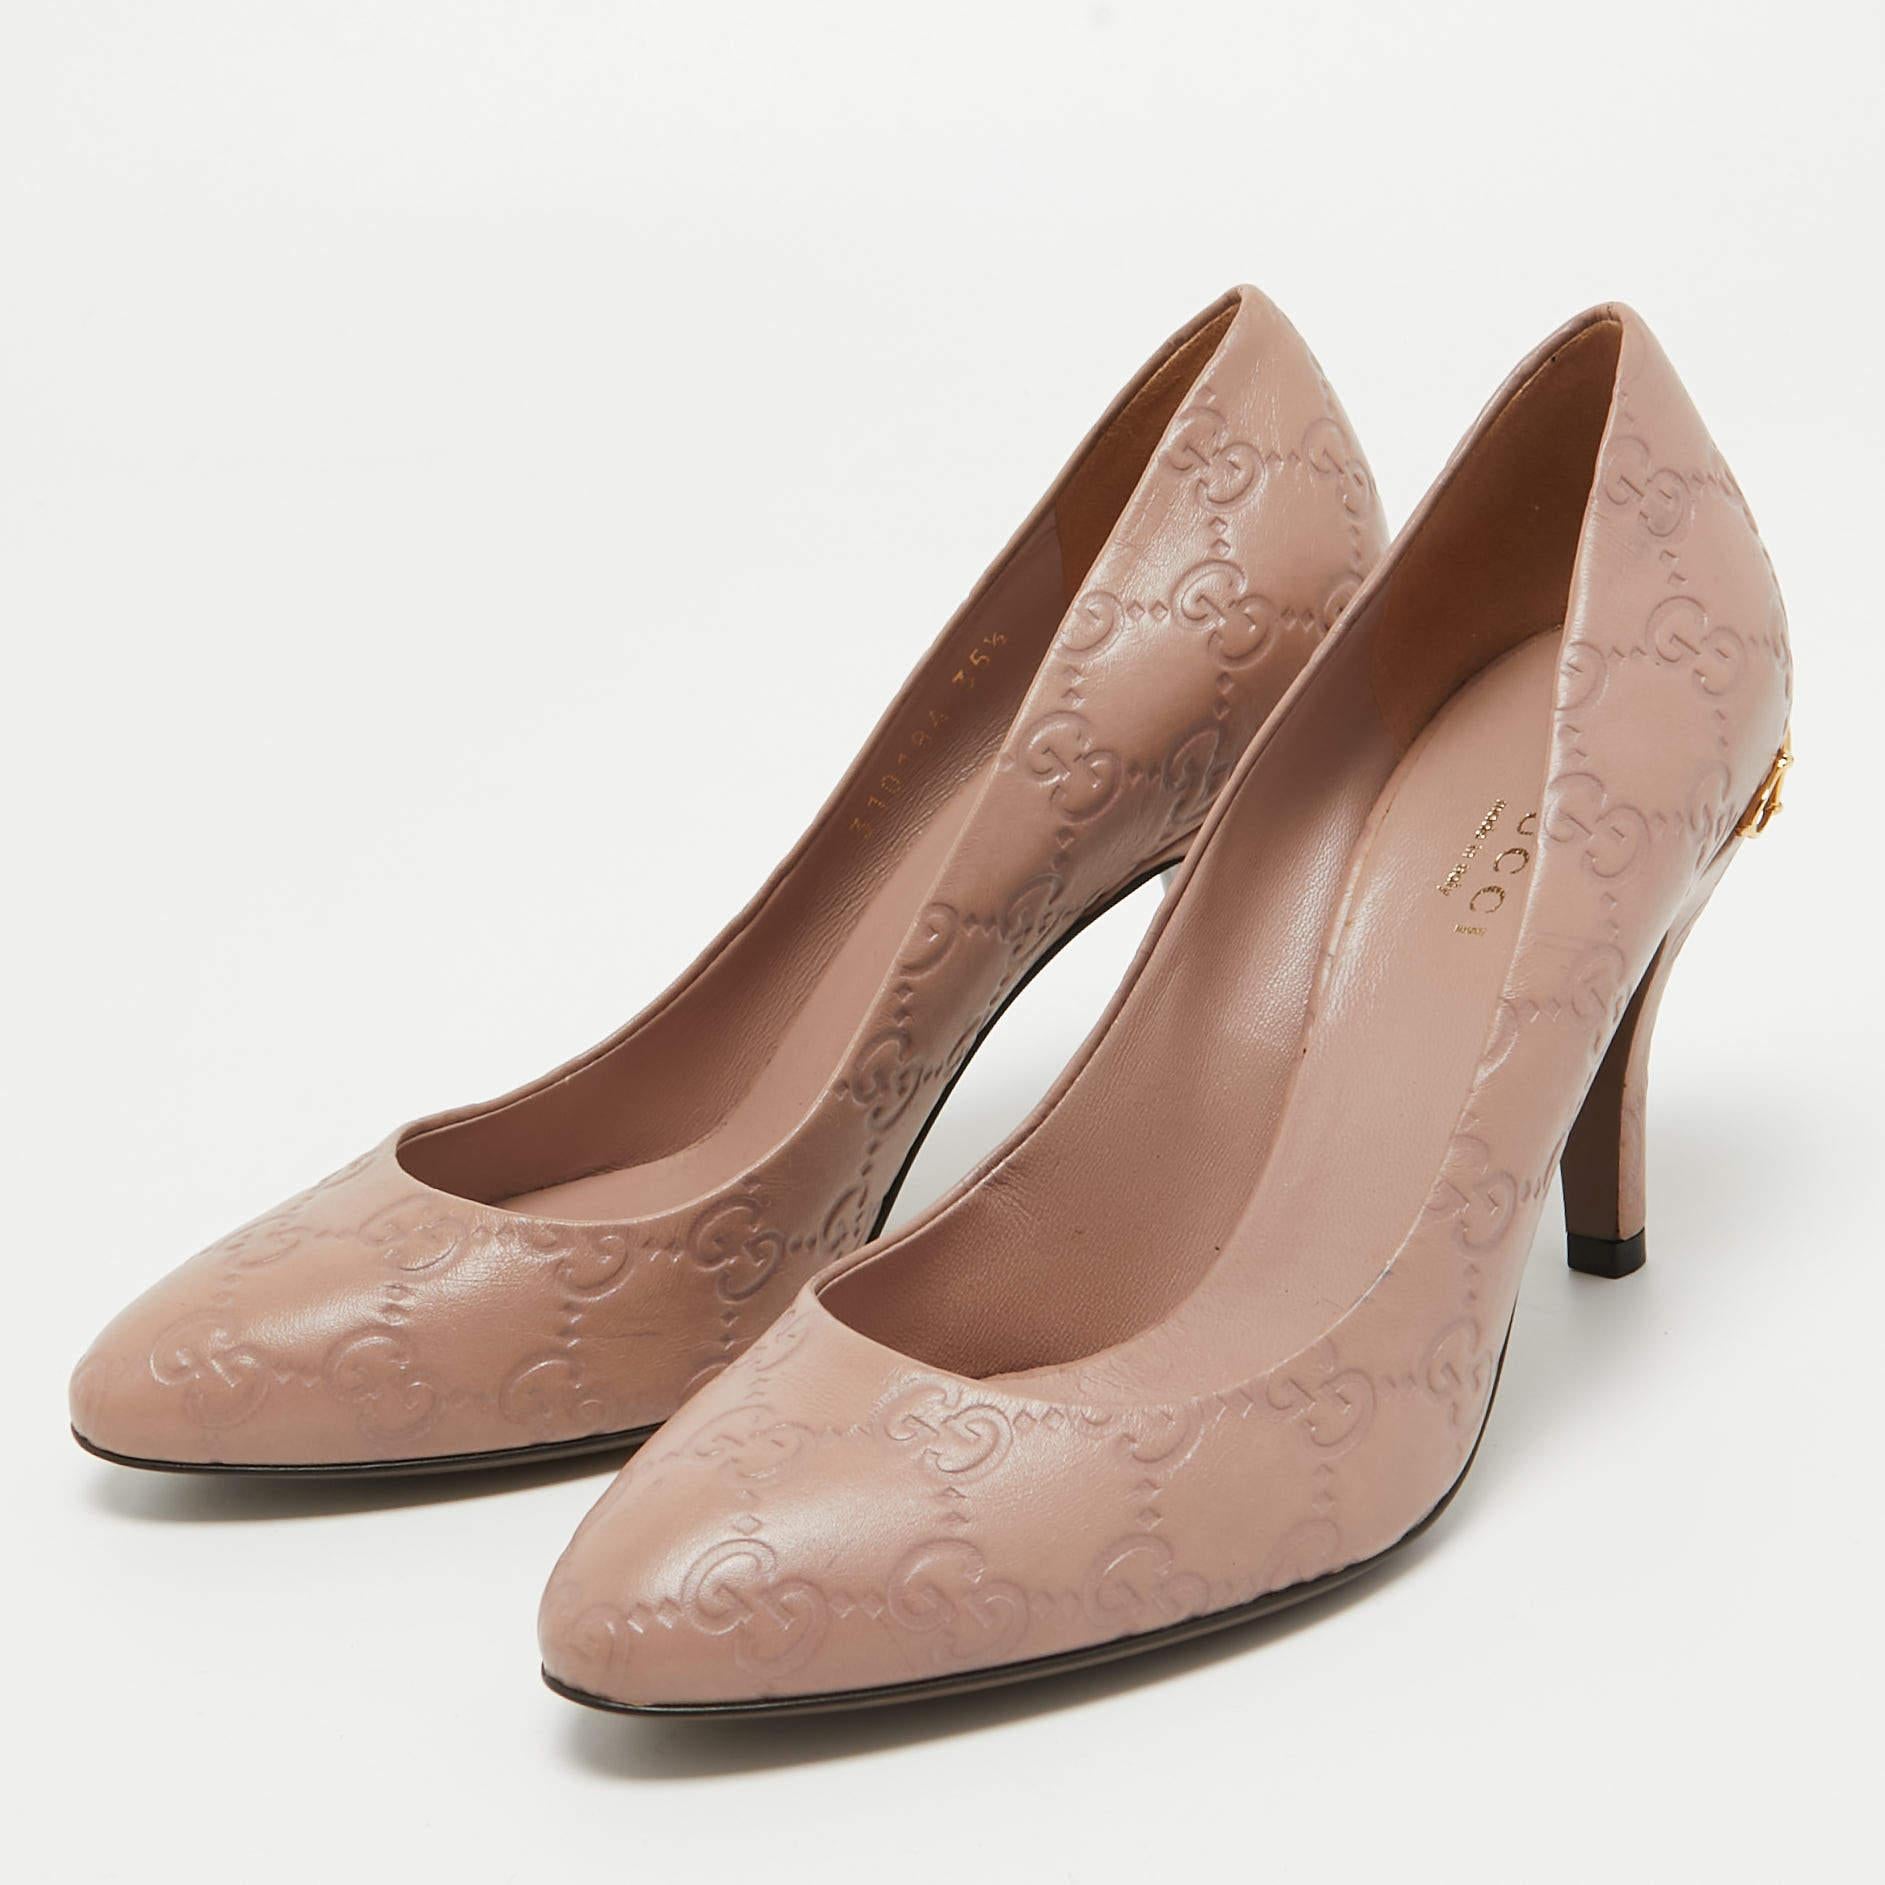 Gucci Pink Leather Guccissima Pumps Size 35.5 For Sale 4